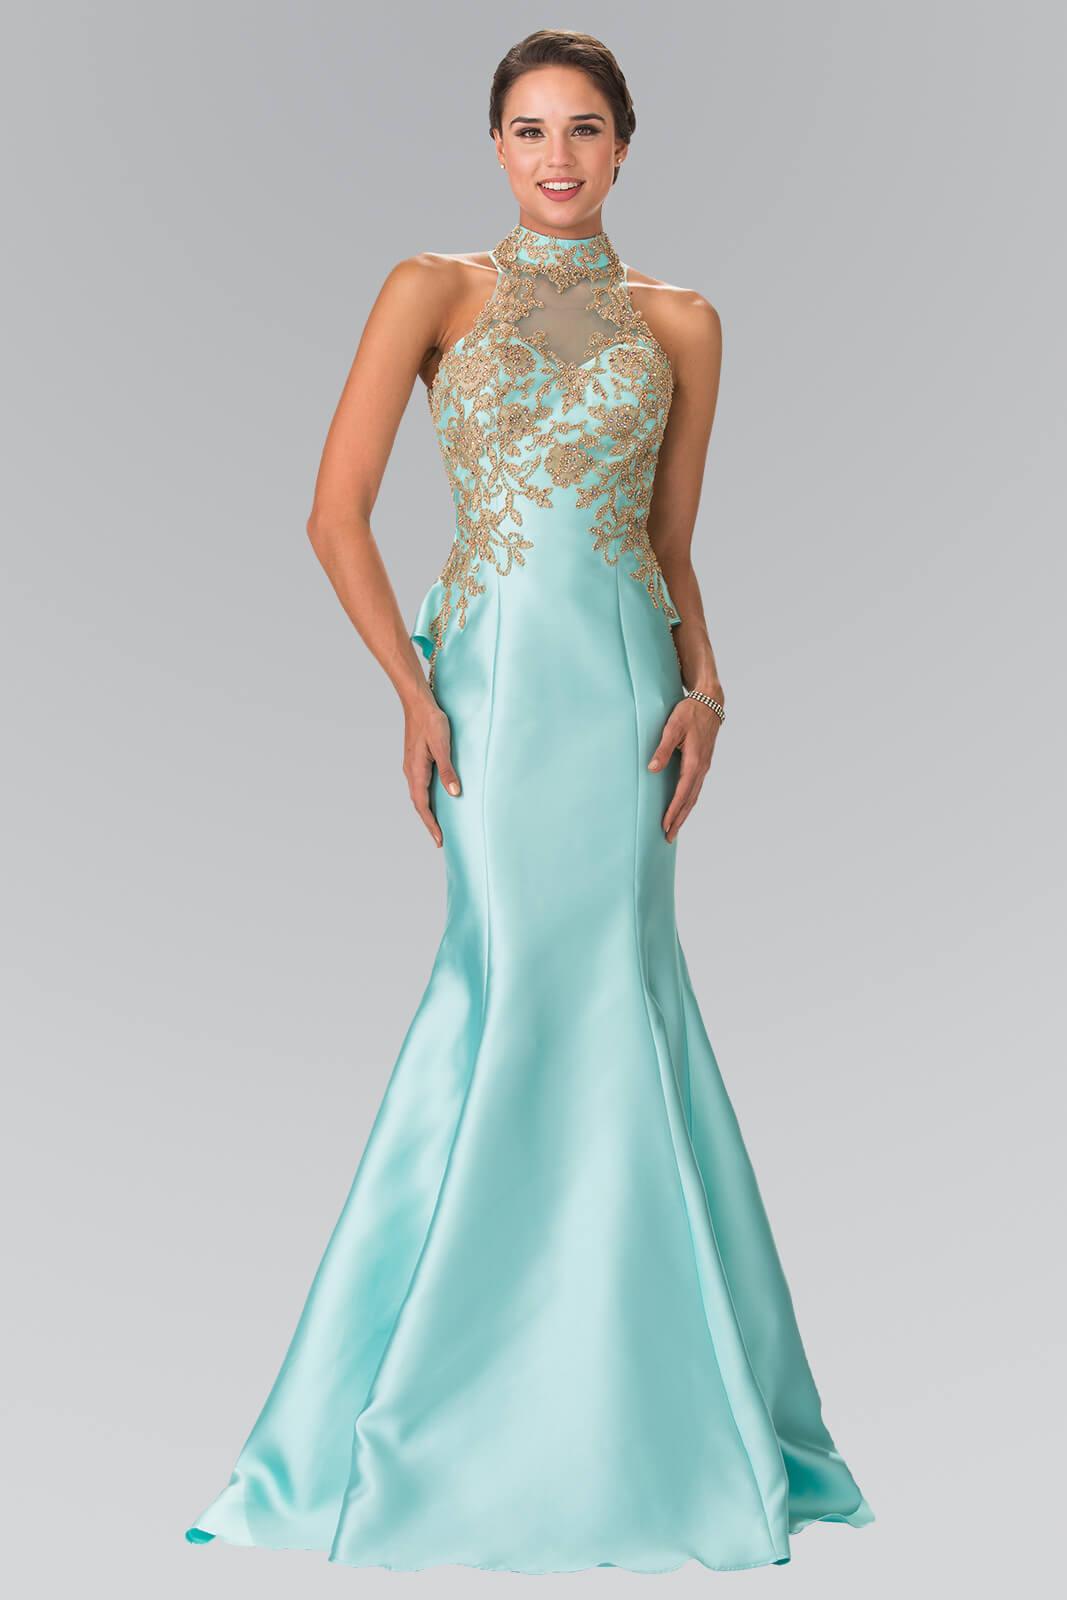 Homecoming Prom Long Formal Evening Gown - The Dress Outlet Elizabeth K